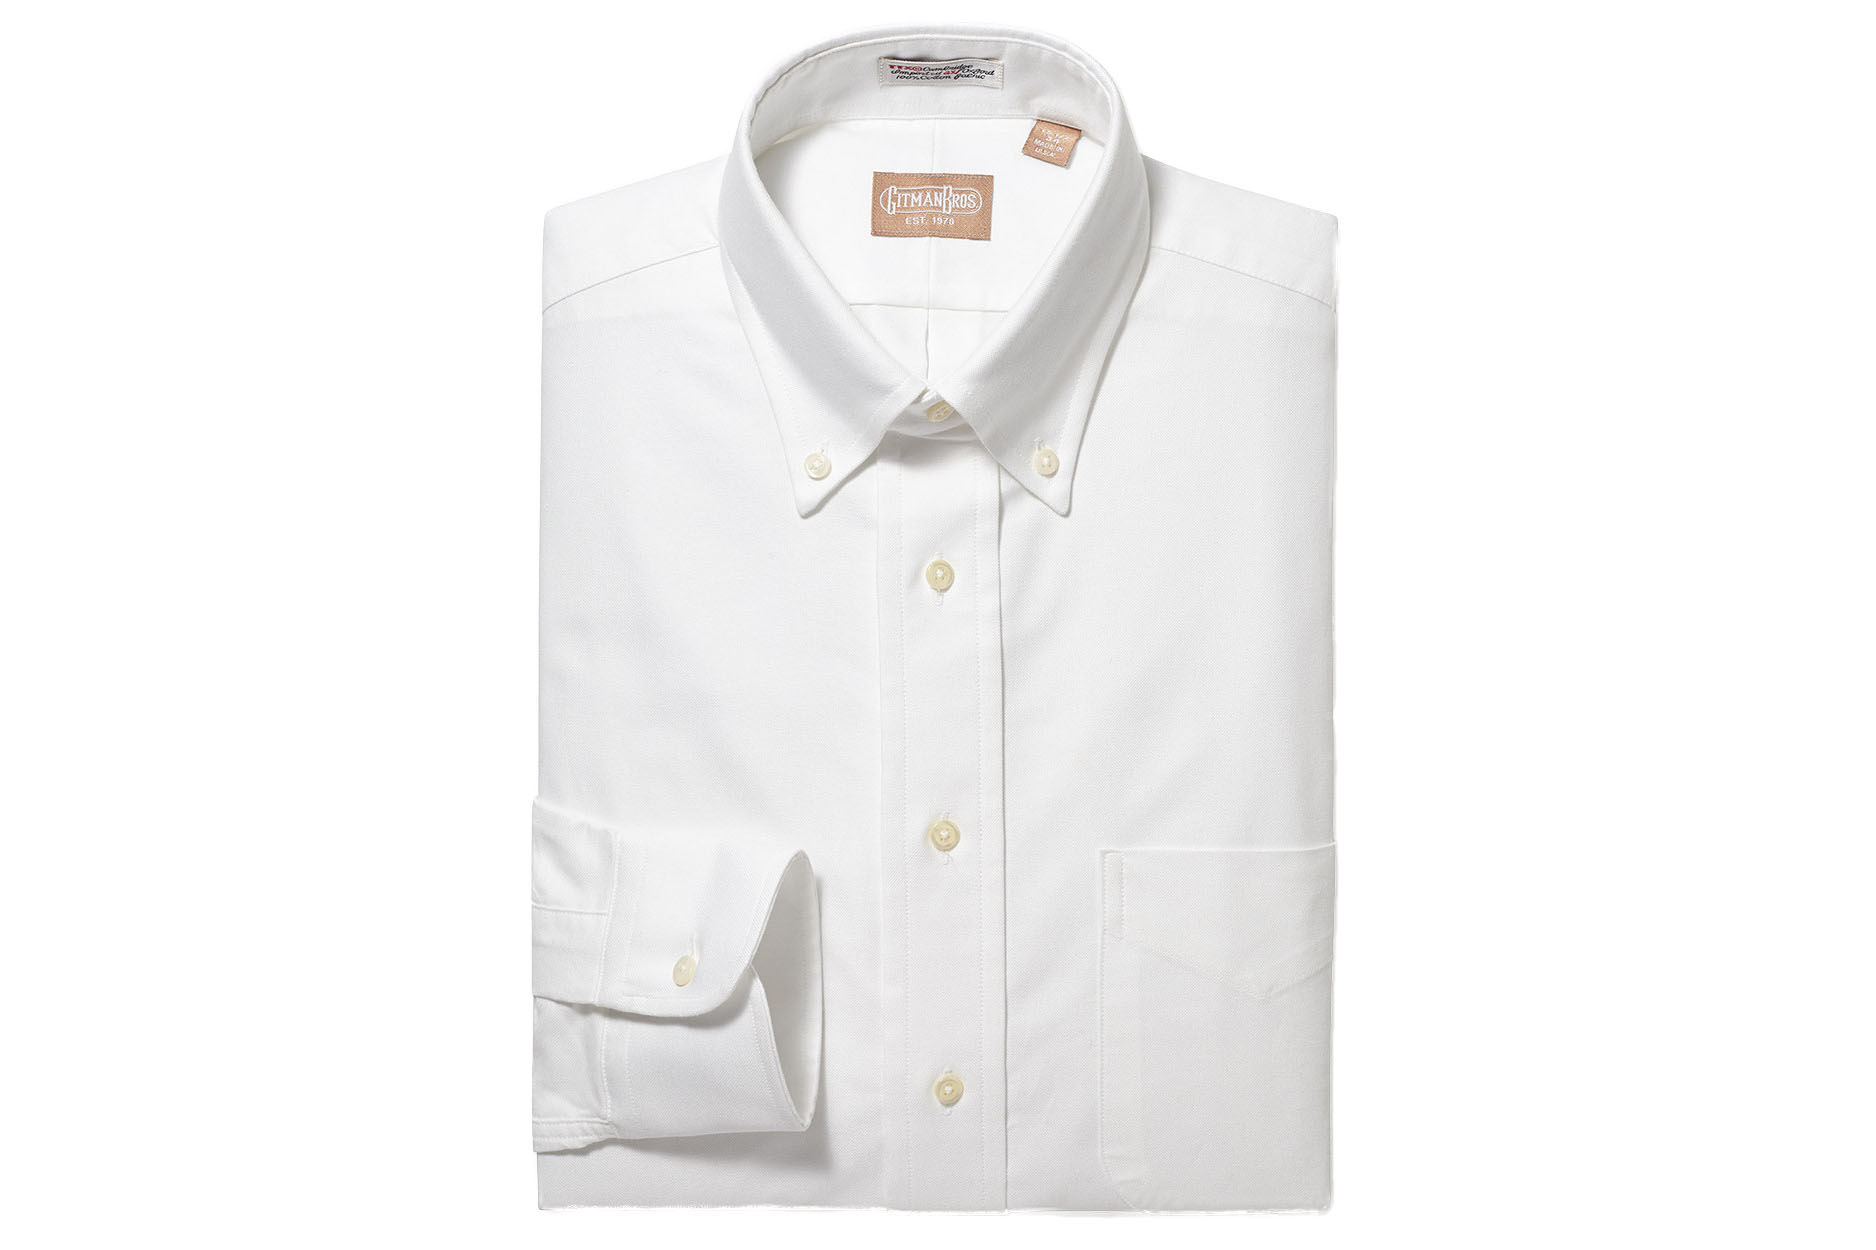 The 8 Best Oxford Shirts for Every Male Body Type - Bloomberg